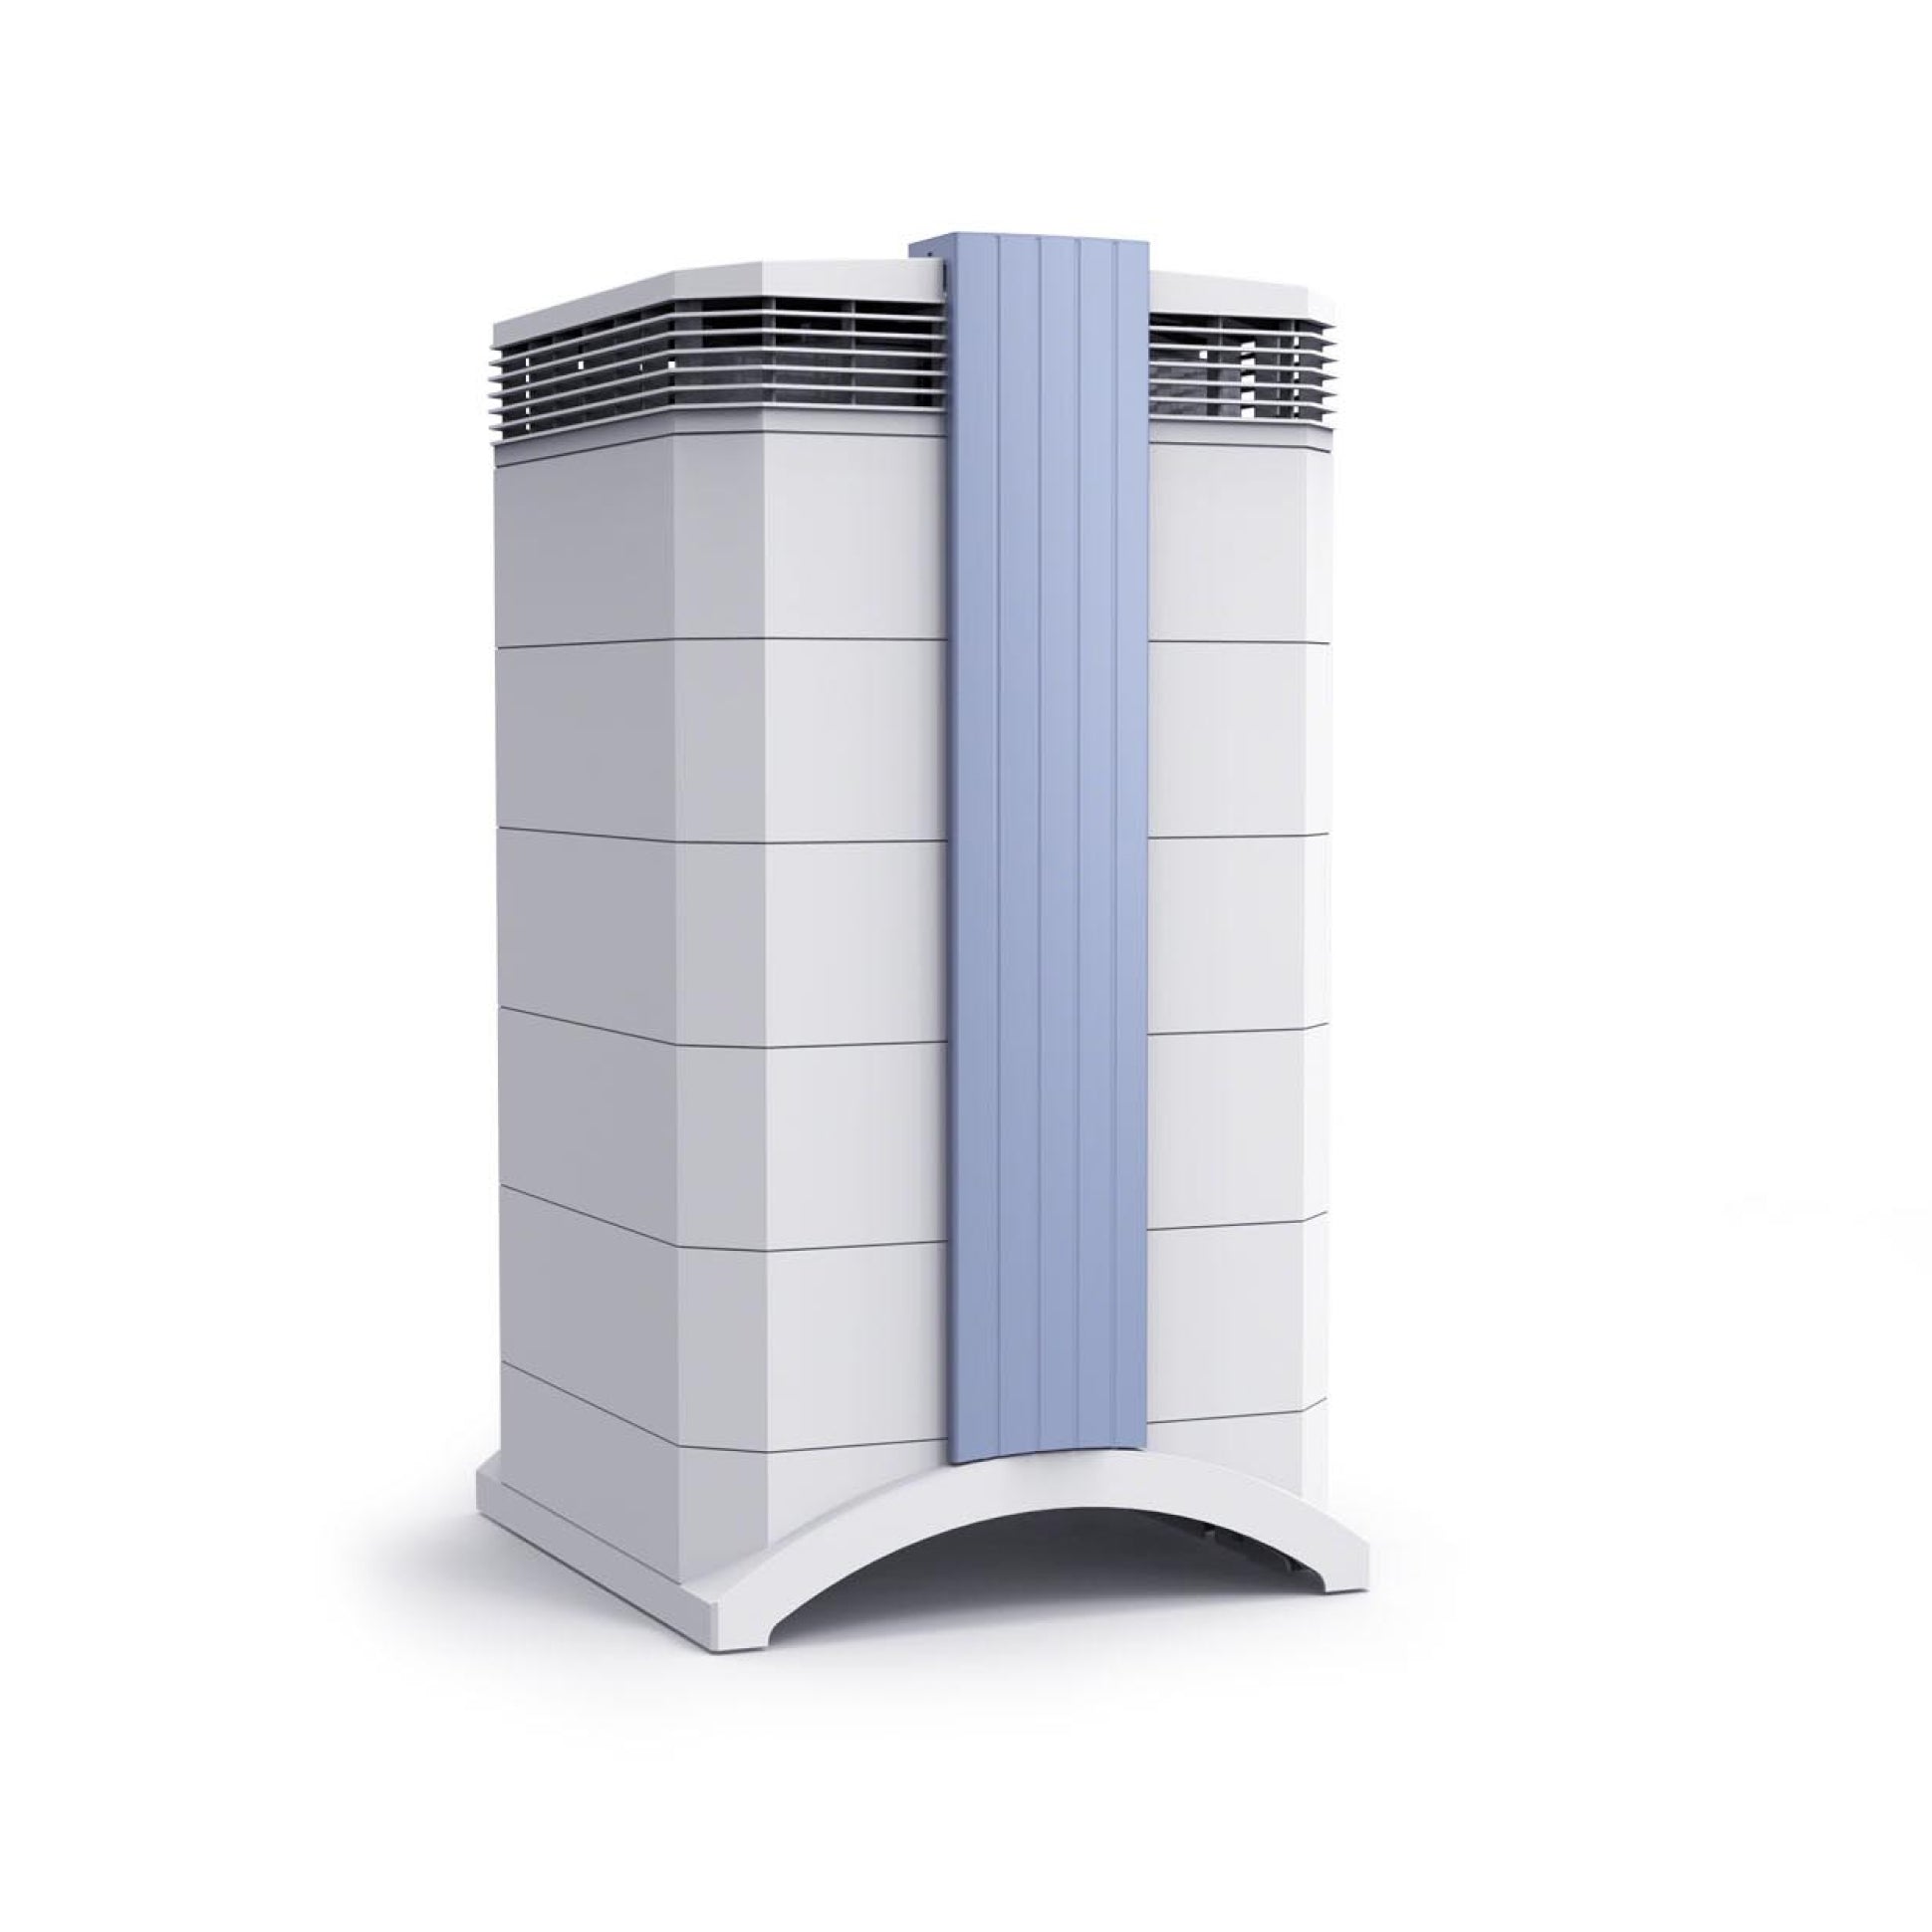 IQAir GC Series air purifier for gases and odors